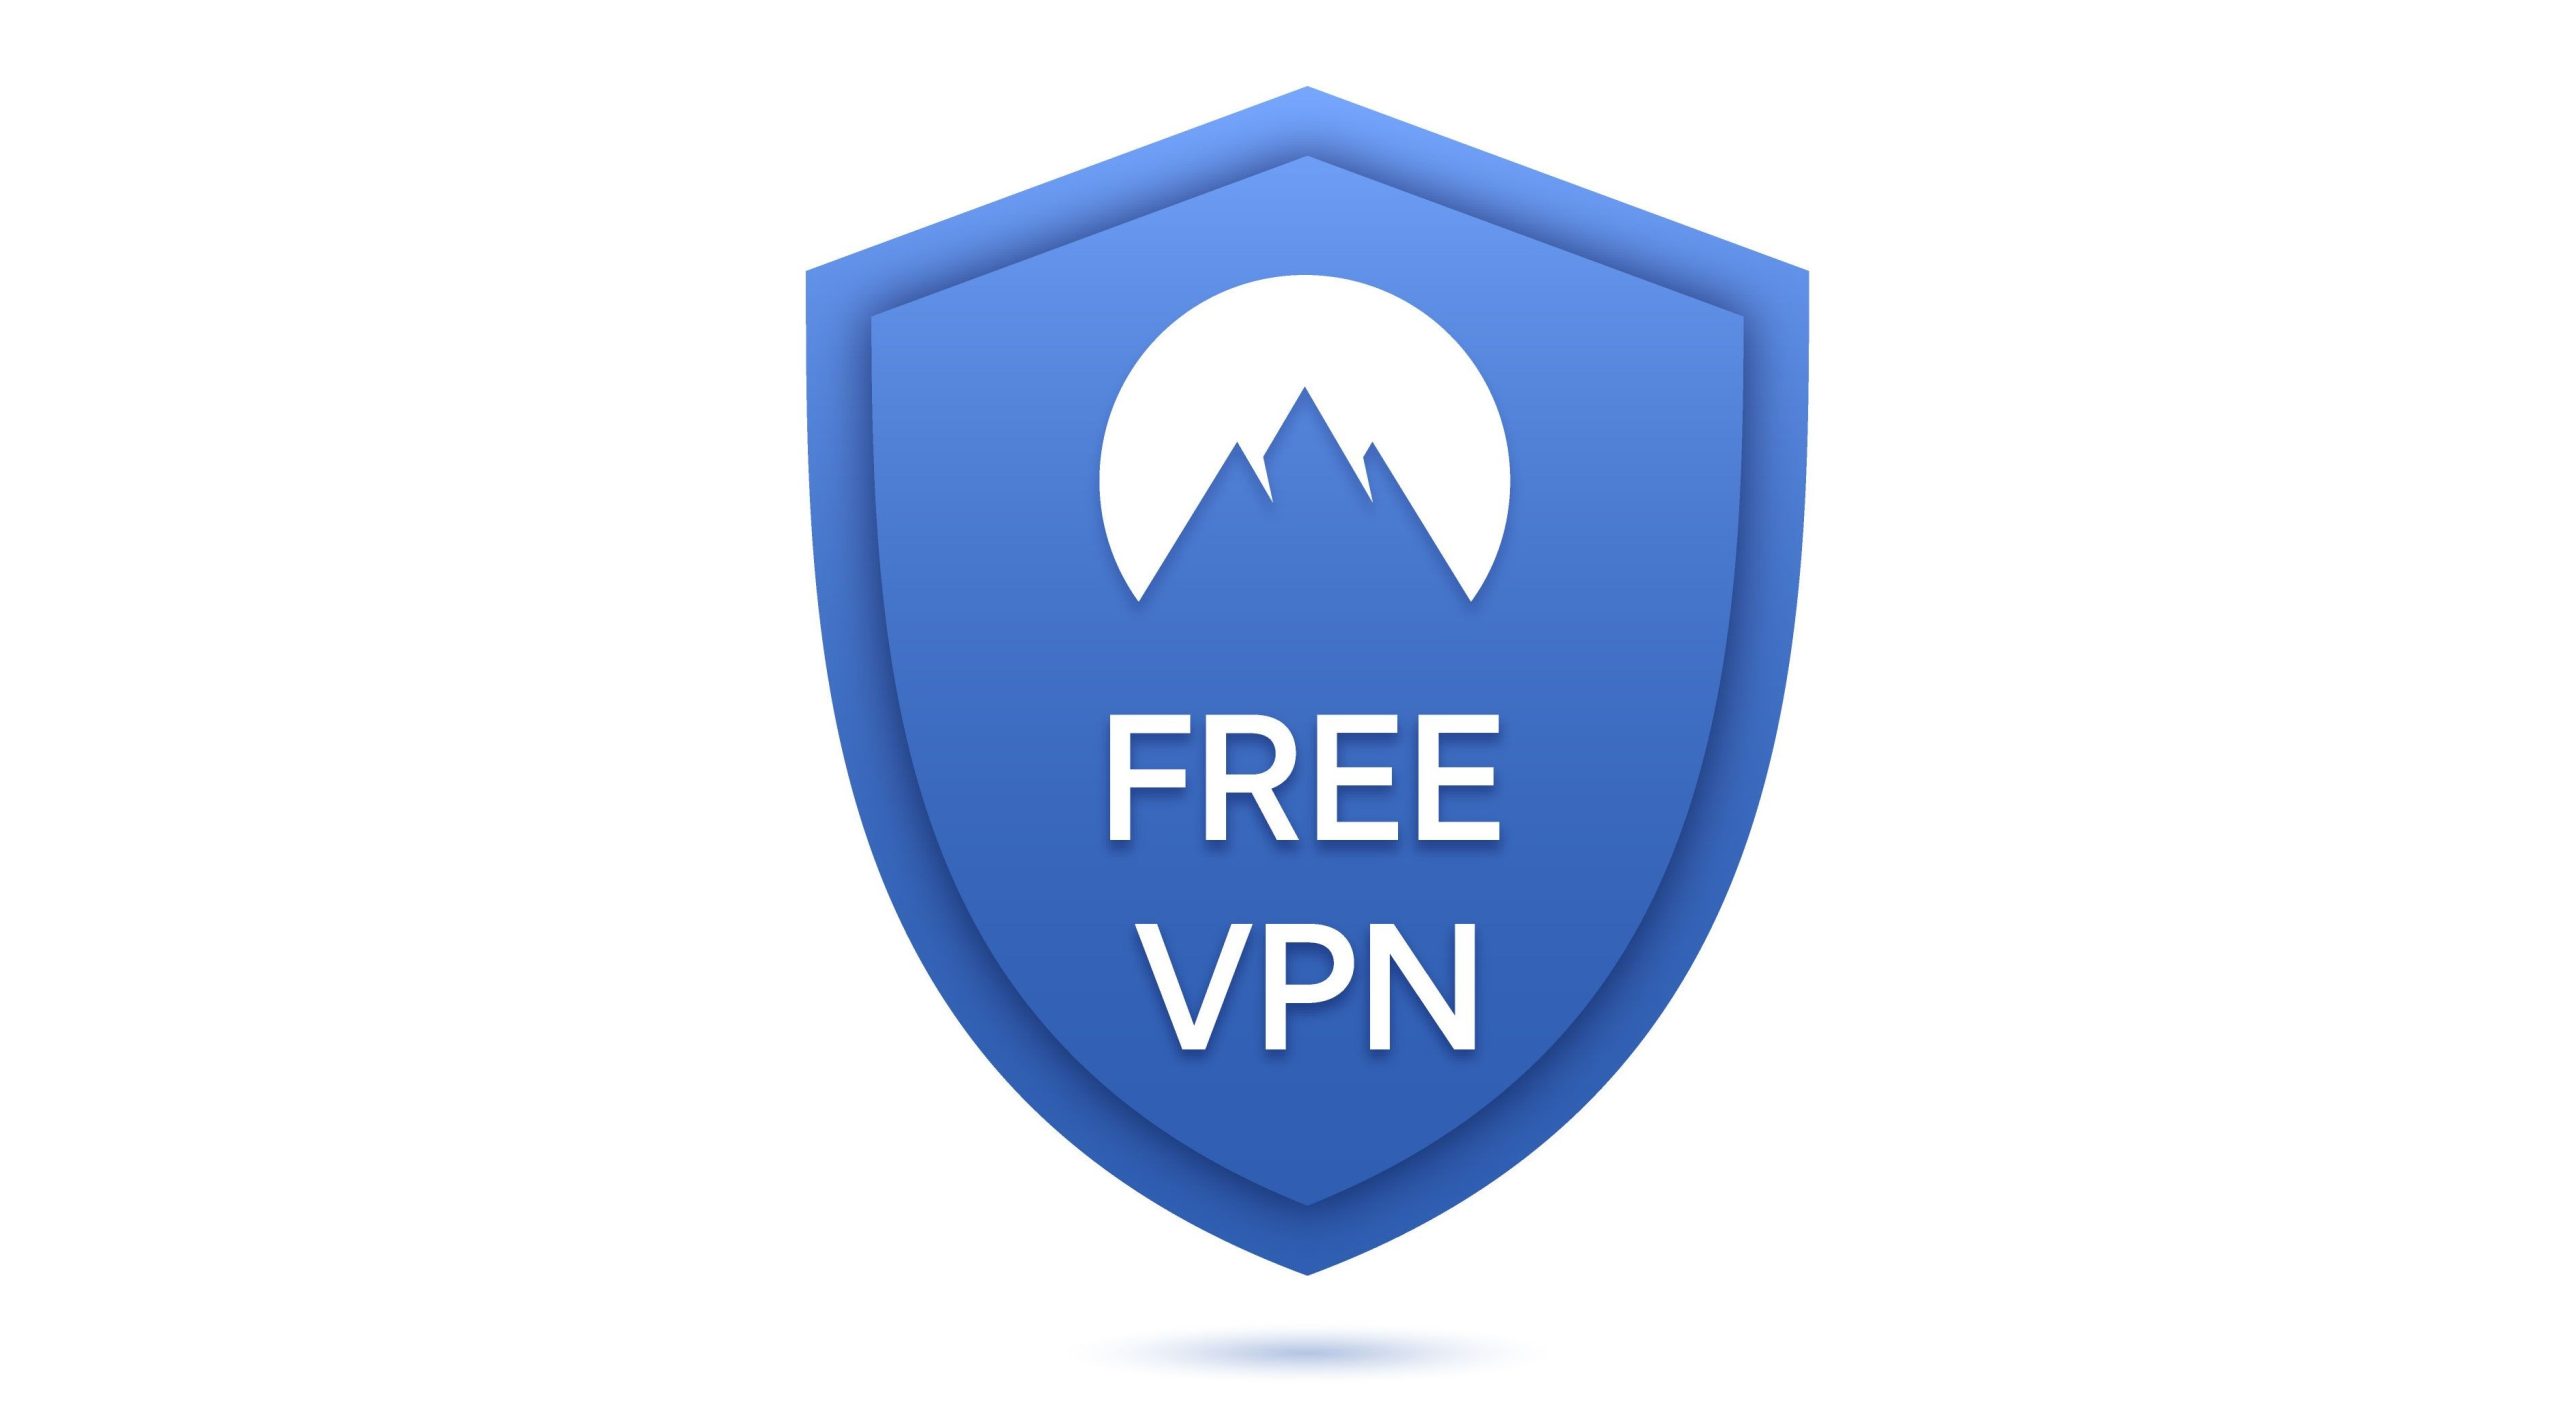 How To Use a VPN For Free?